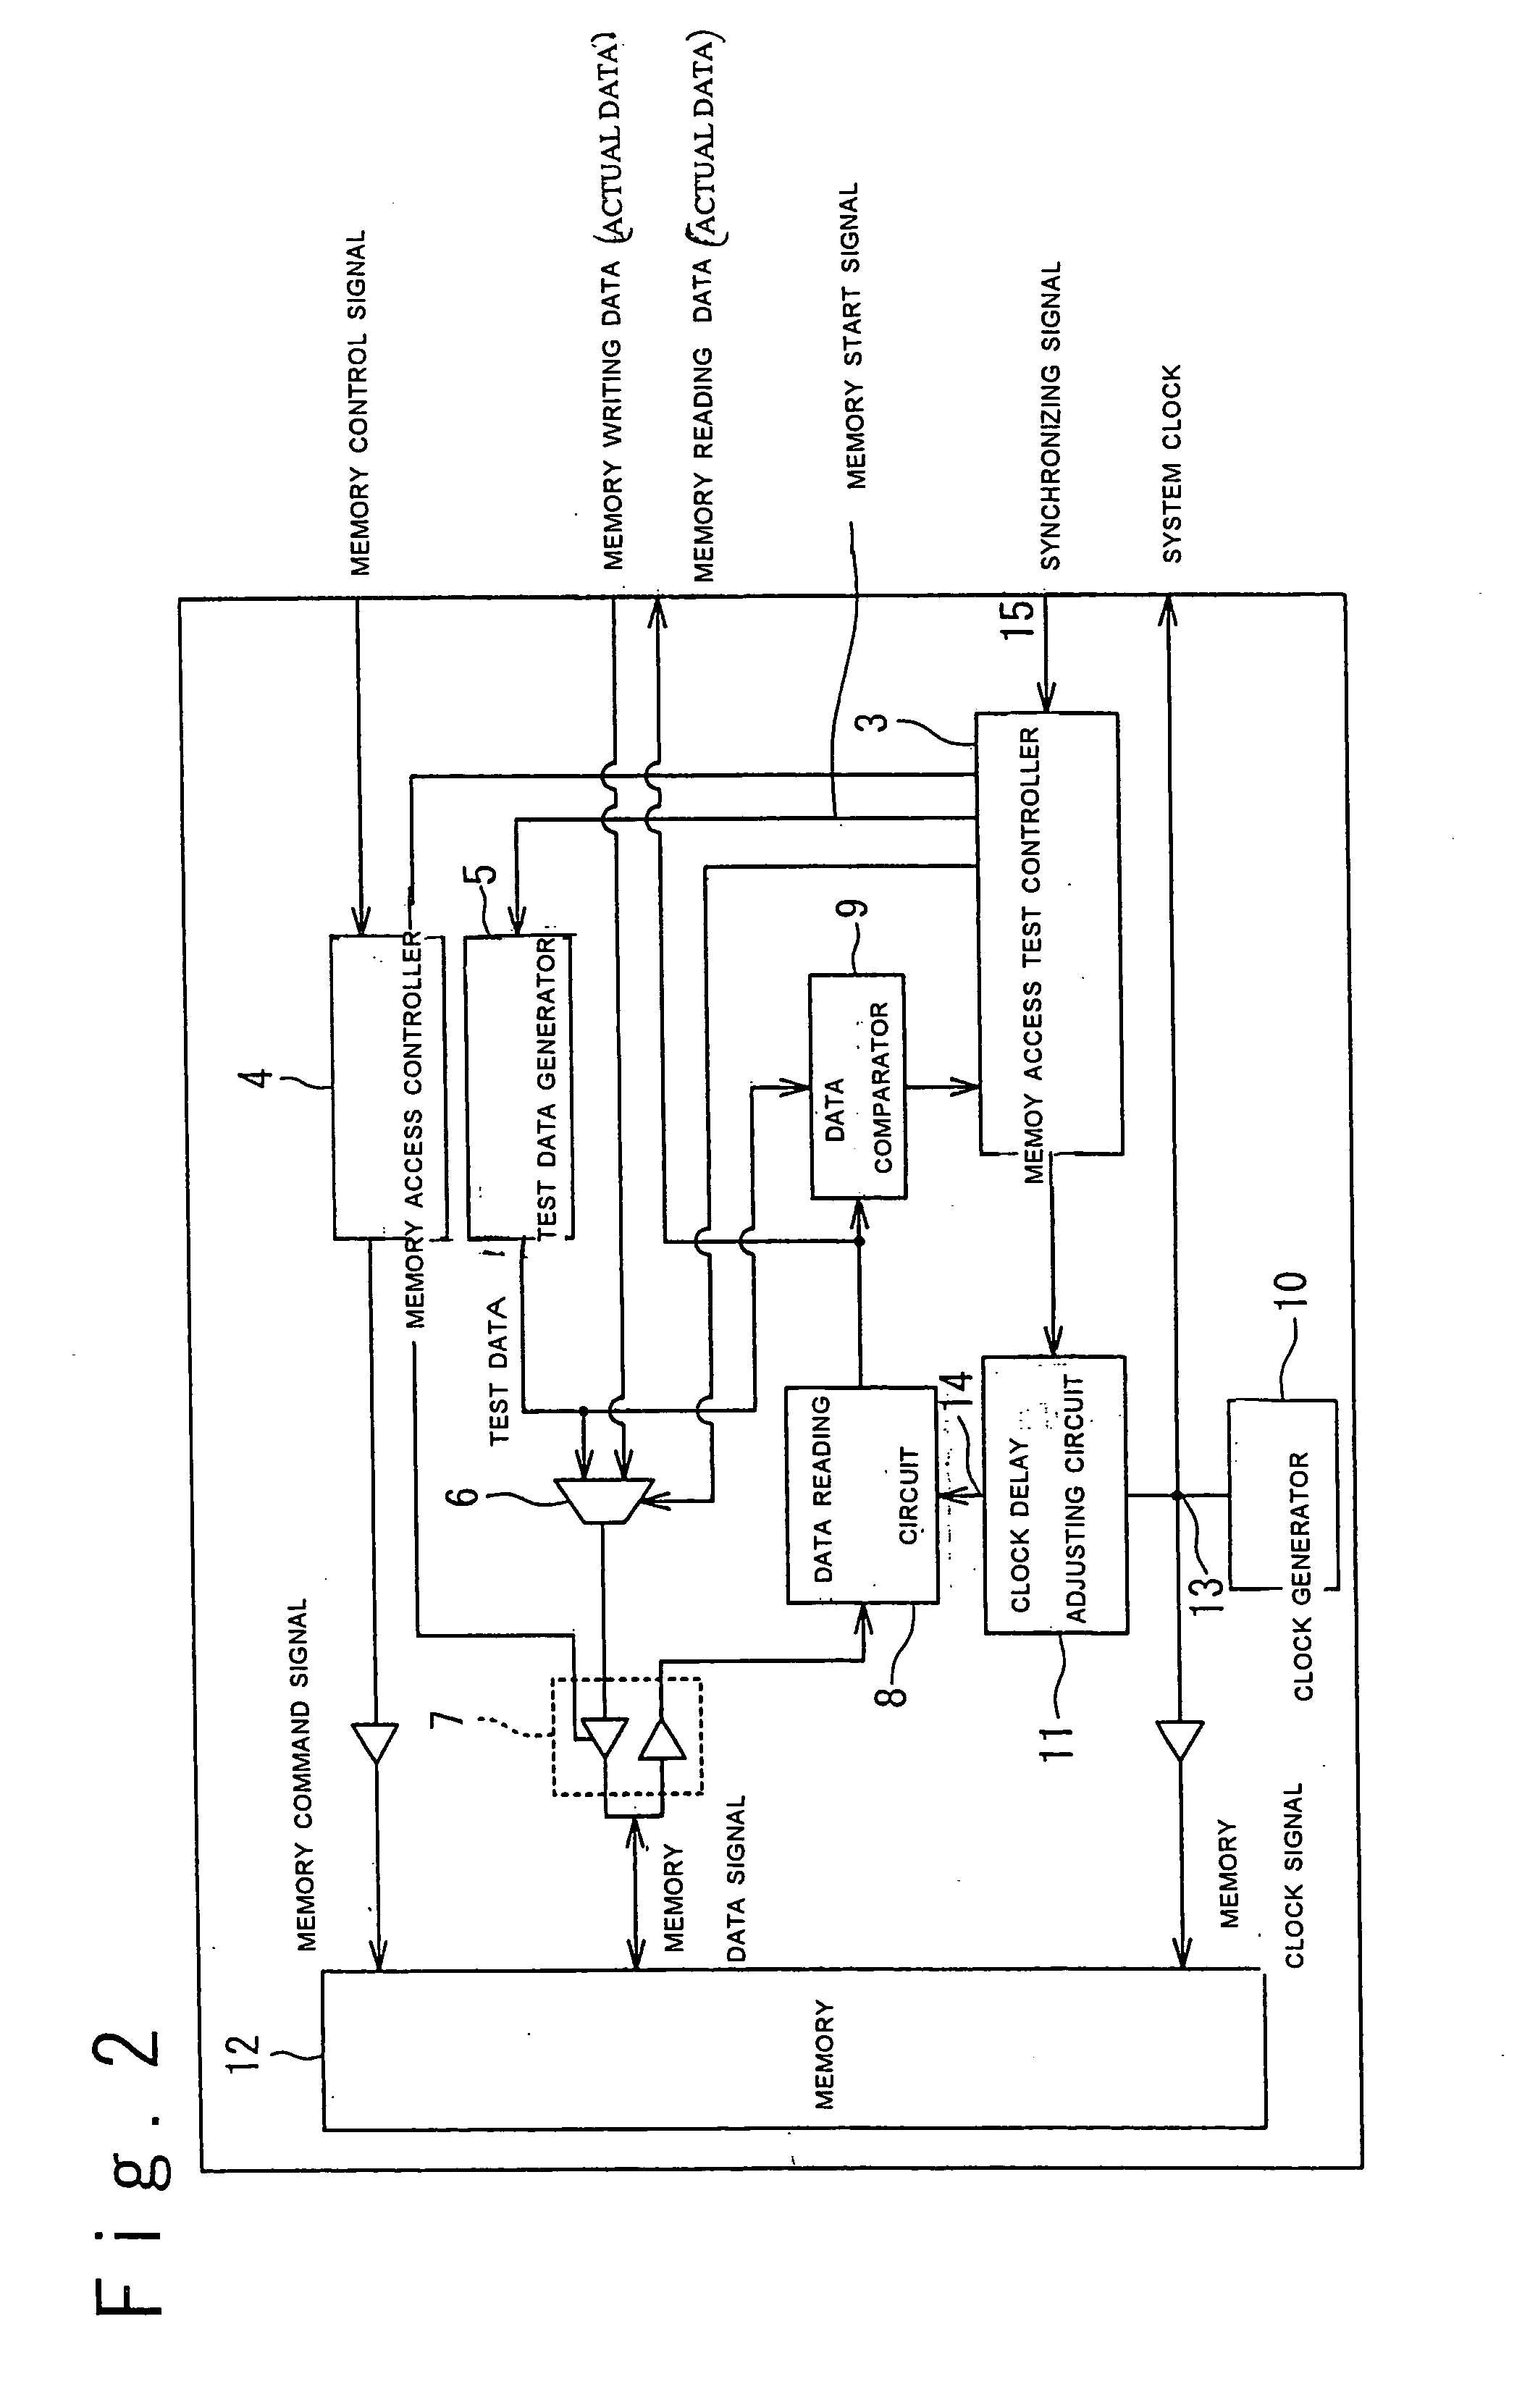 Memory access circuit for adjusting delay of internal clock signal used for memory control